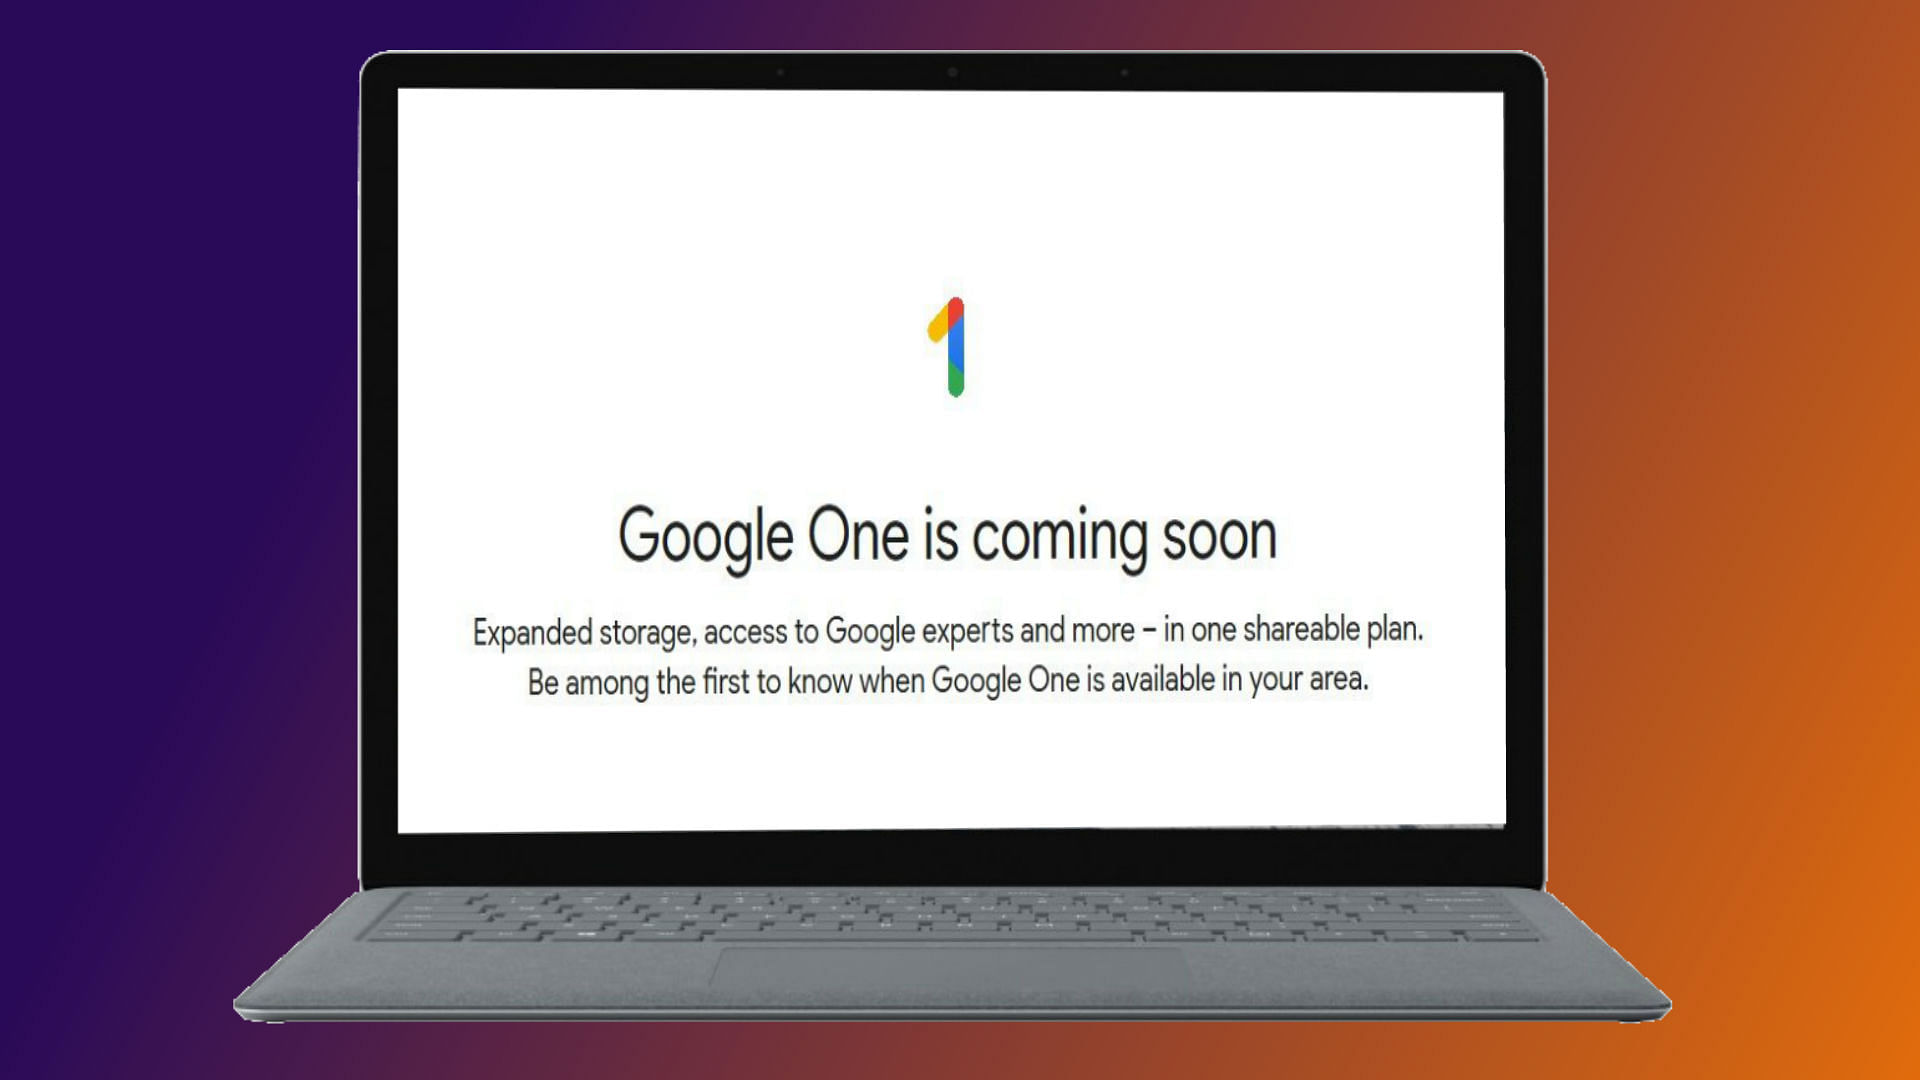 Google One offers the same features as Drive but new benefits added.